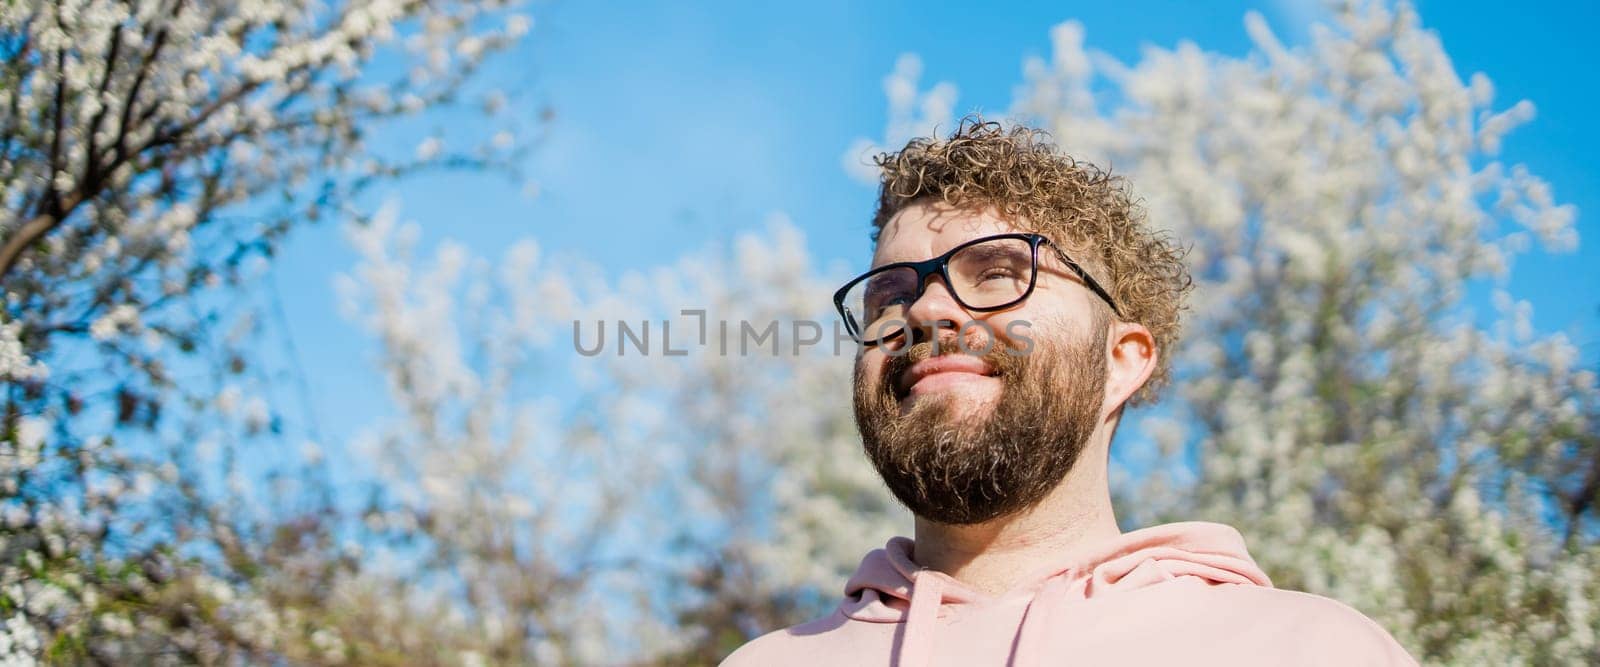 Male bearded guy standing under branches with flowers of blooming almond or cherry tree in spring garden. Spring blossom. Copy space